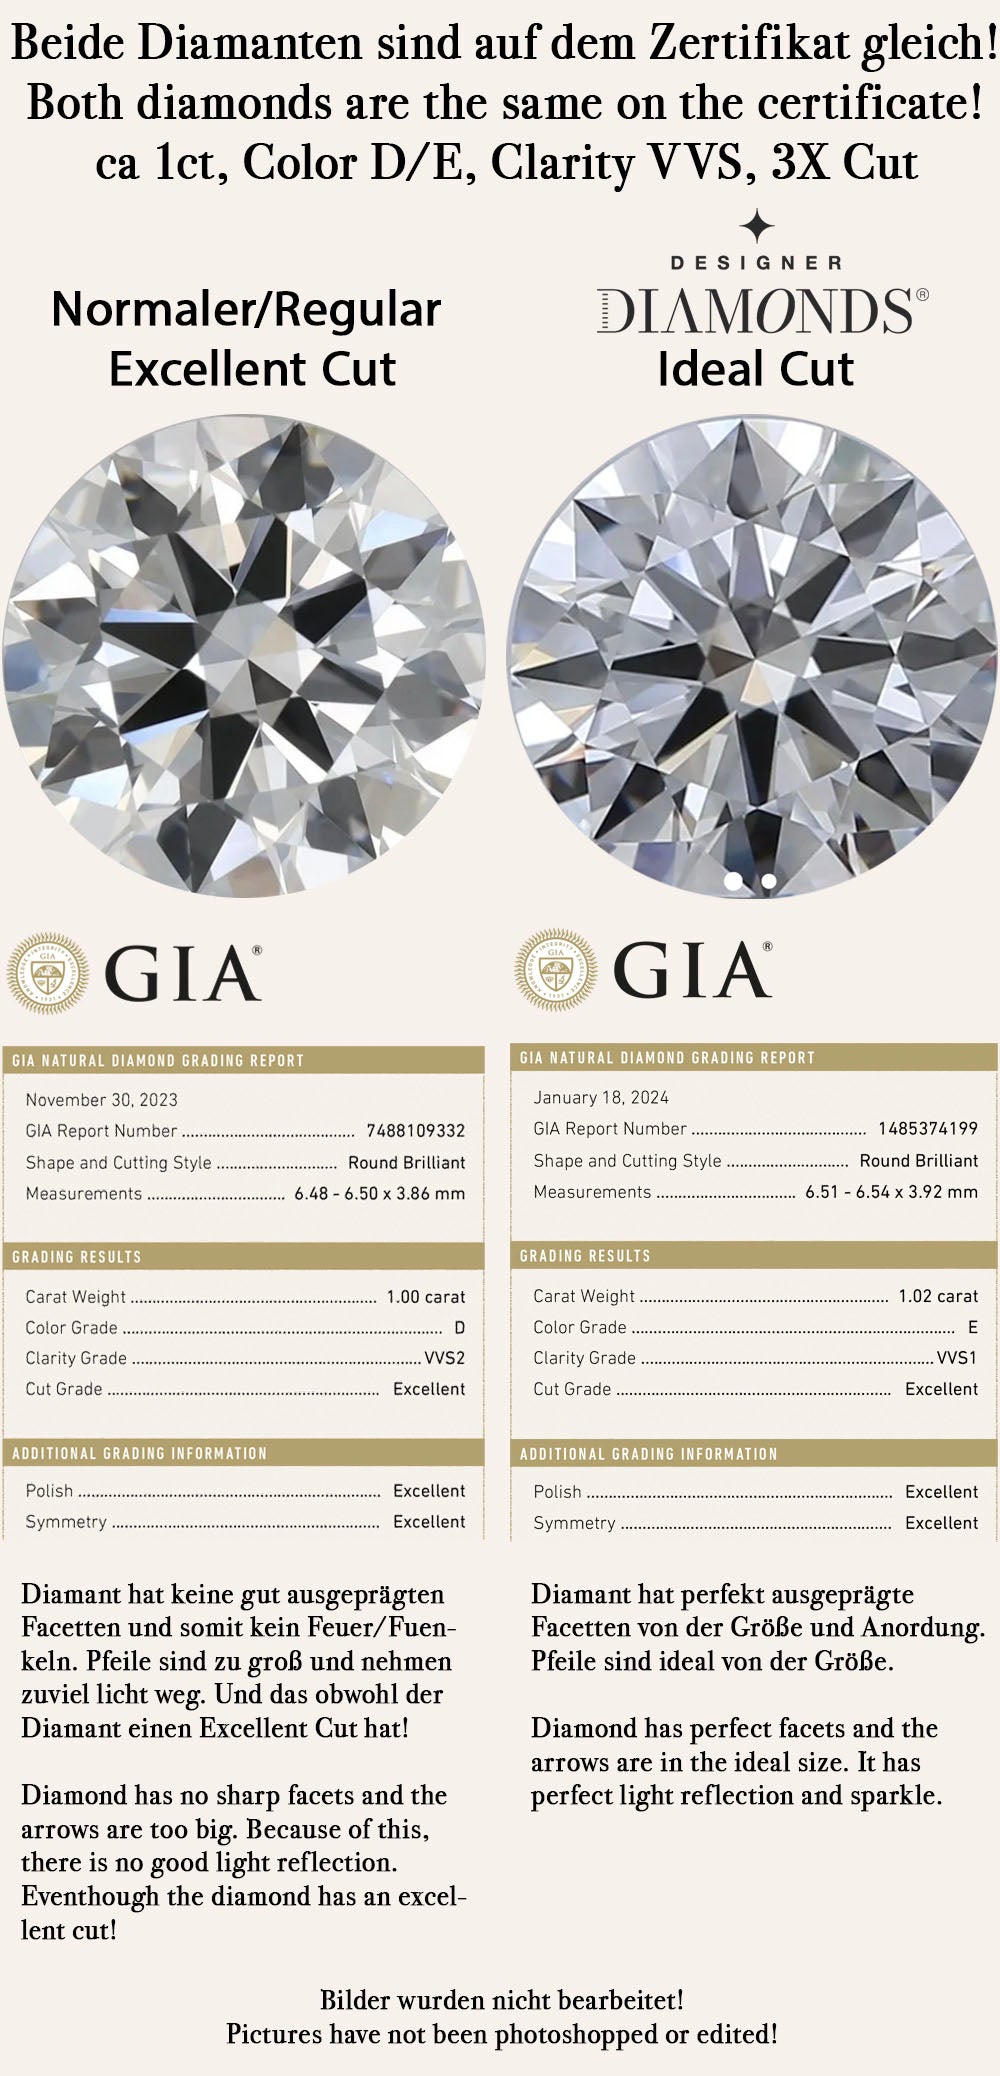 GIA Excellent Cuts are not the same and also never a guarantee that these diamonds are beautiful